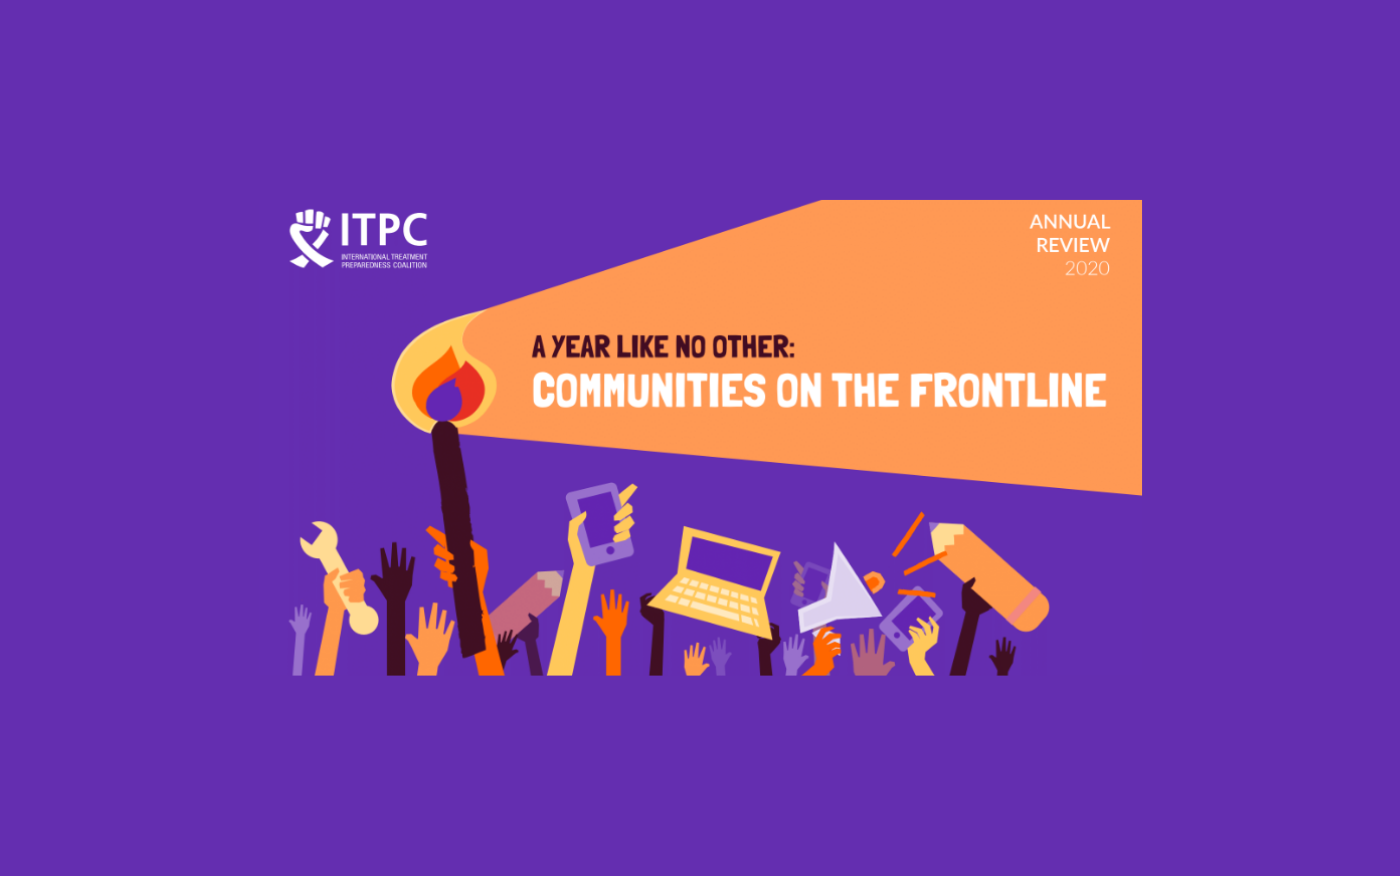 ITPC Global Annual Report: Communities on the Frontline video transcript